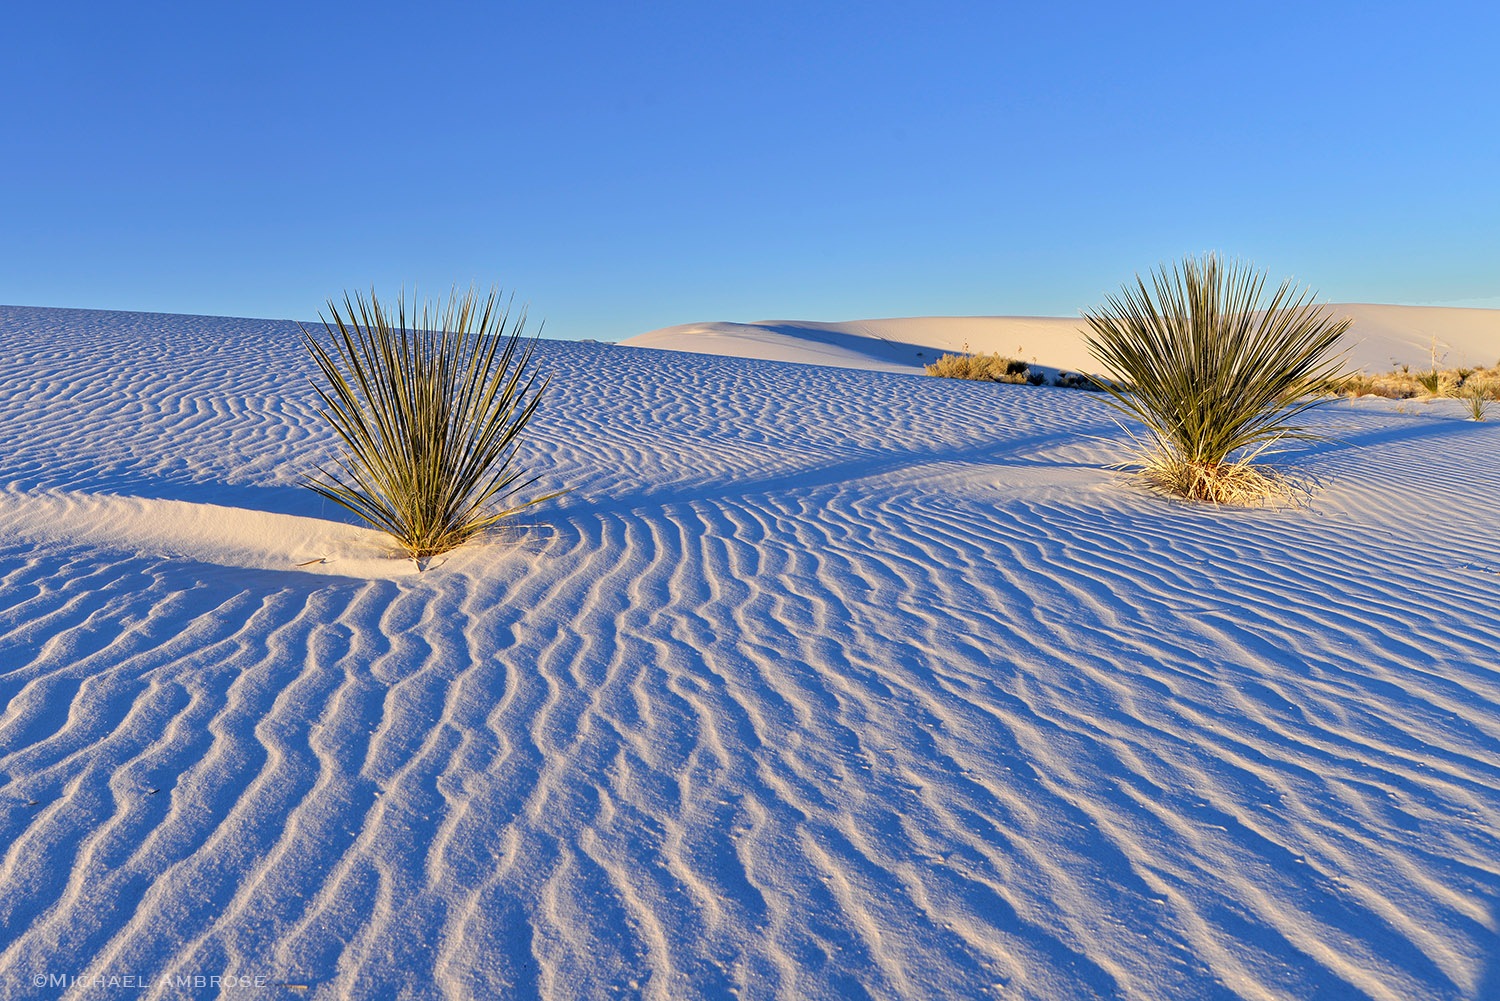 Ripples in pure white sand dunes seem to stretch endlessly in White Sands, New Mexico.